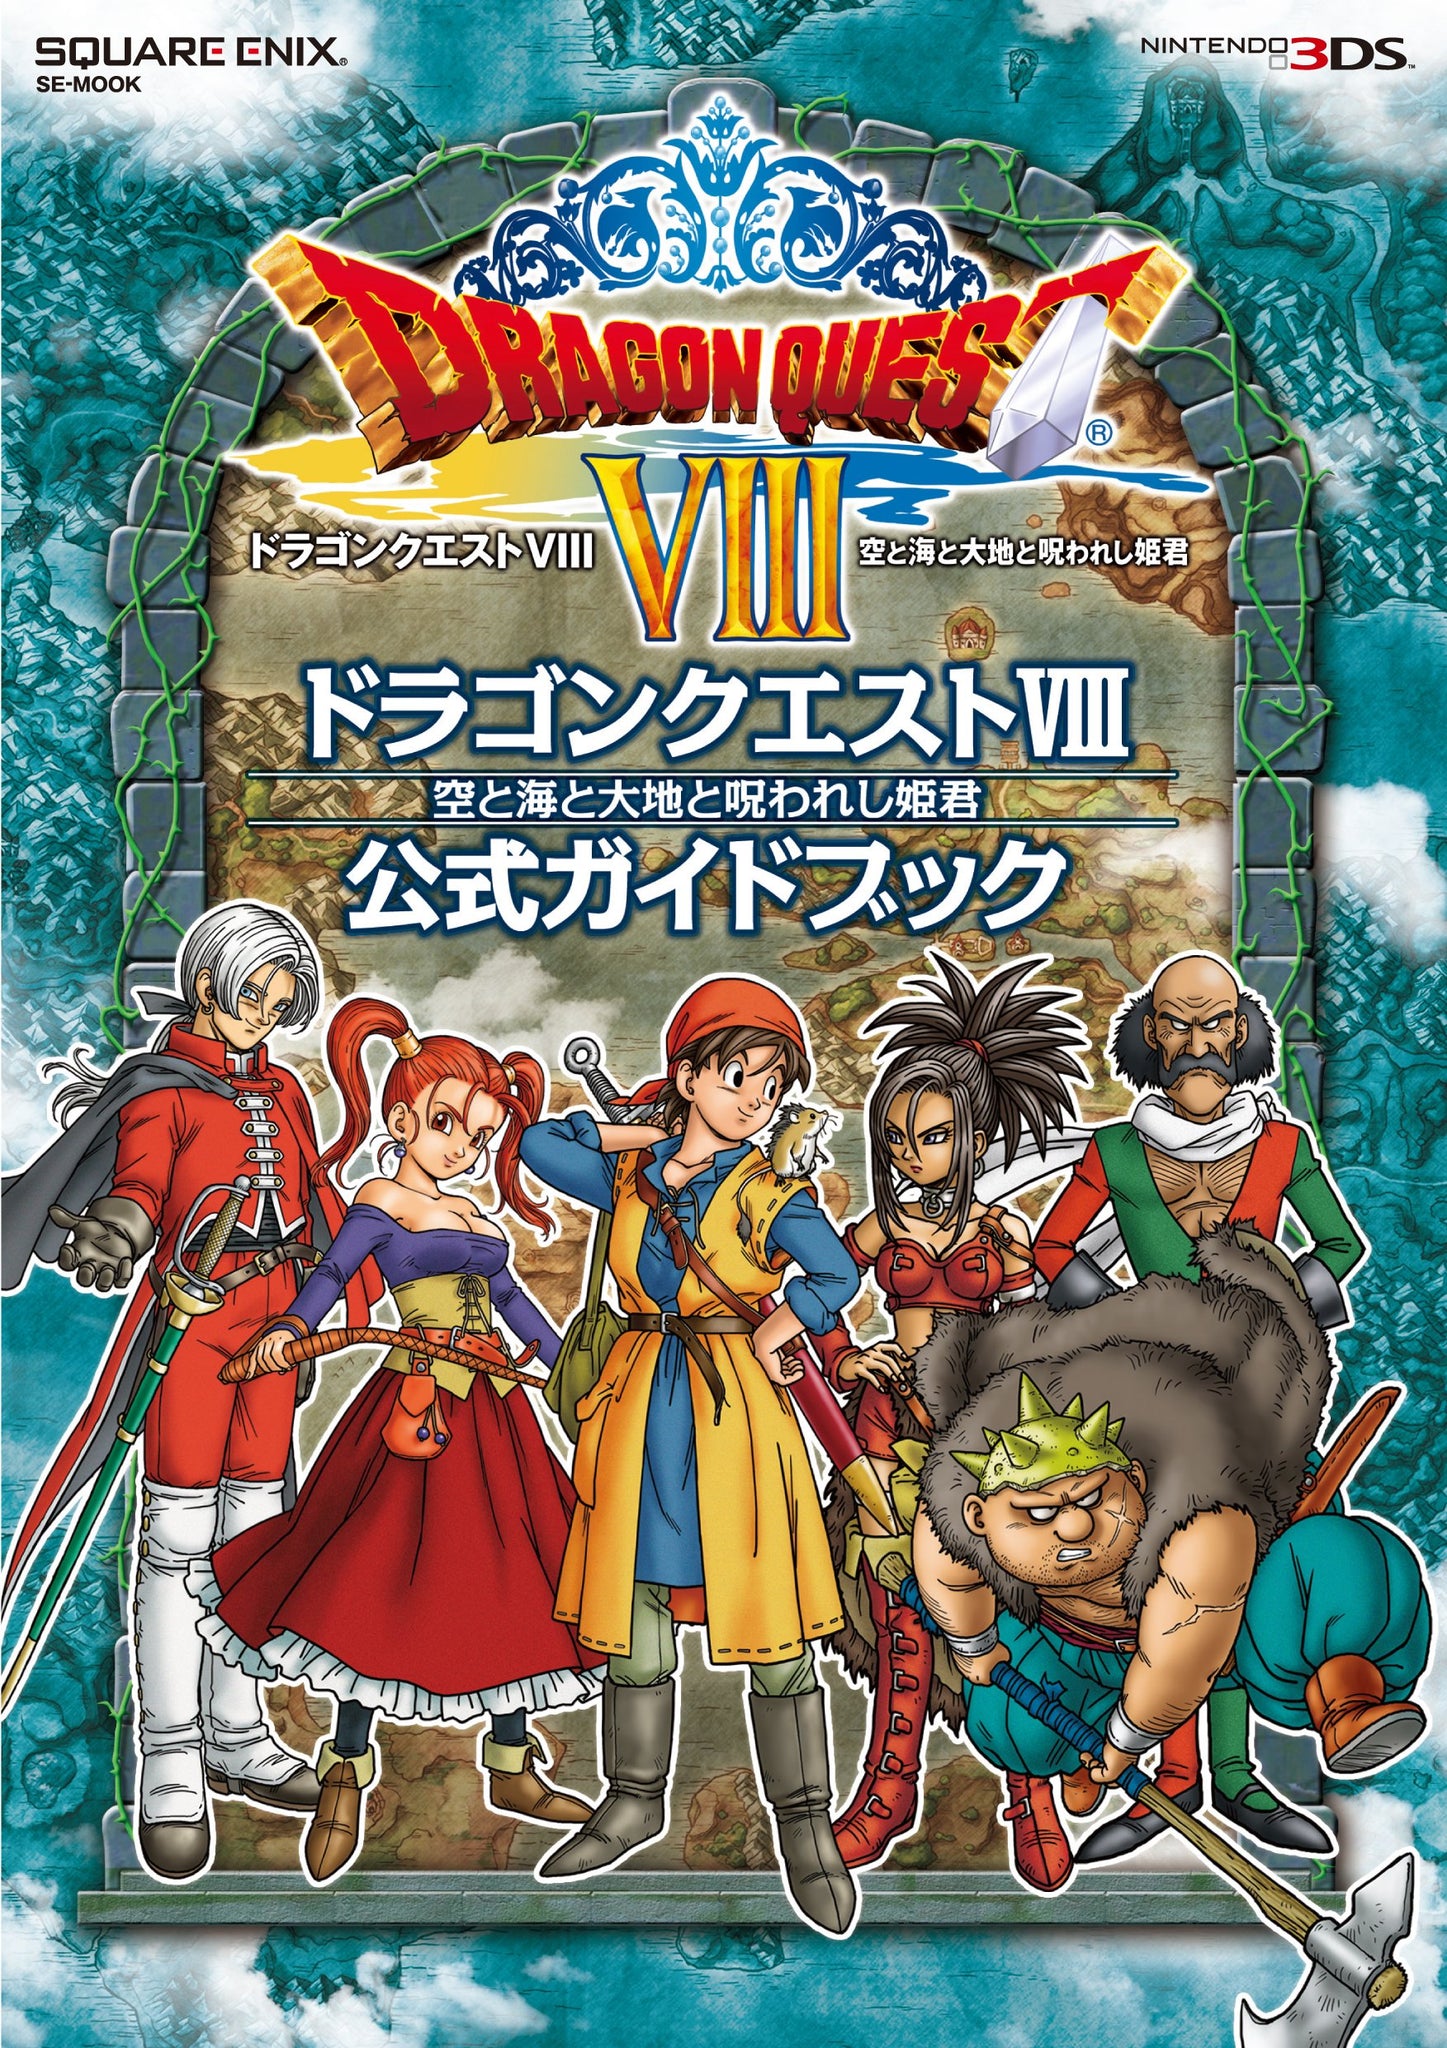 Nintendo 3DS Dragon Quest VIII: Journey of the Cursed King 